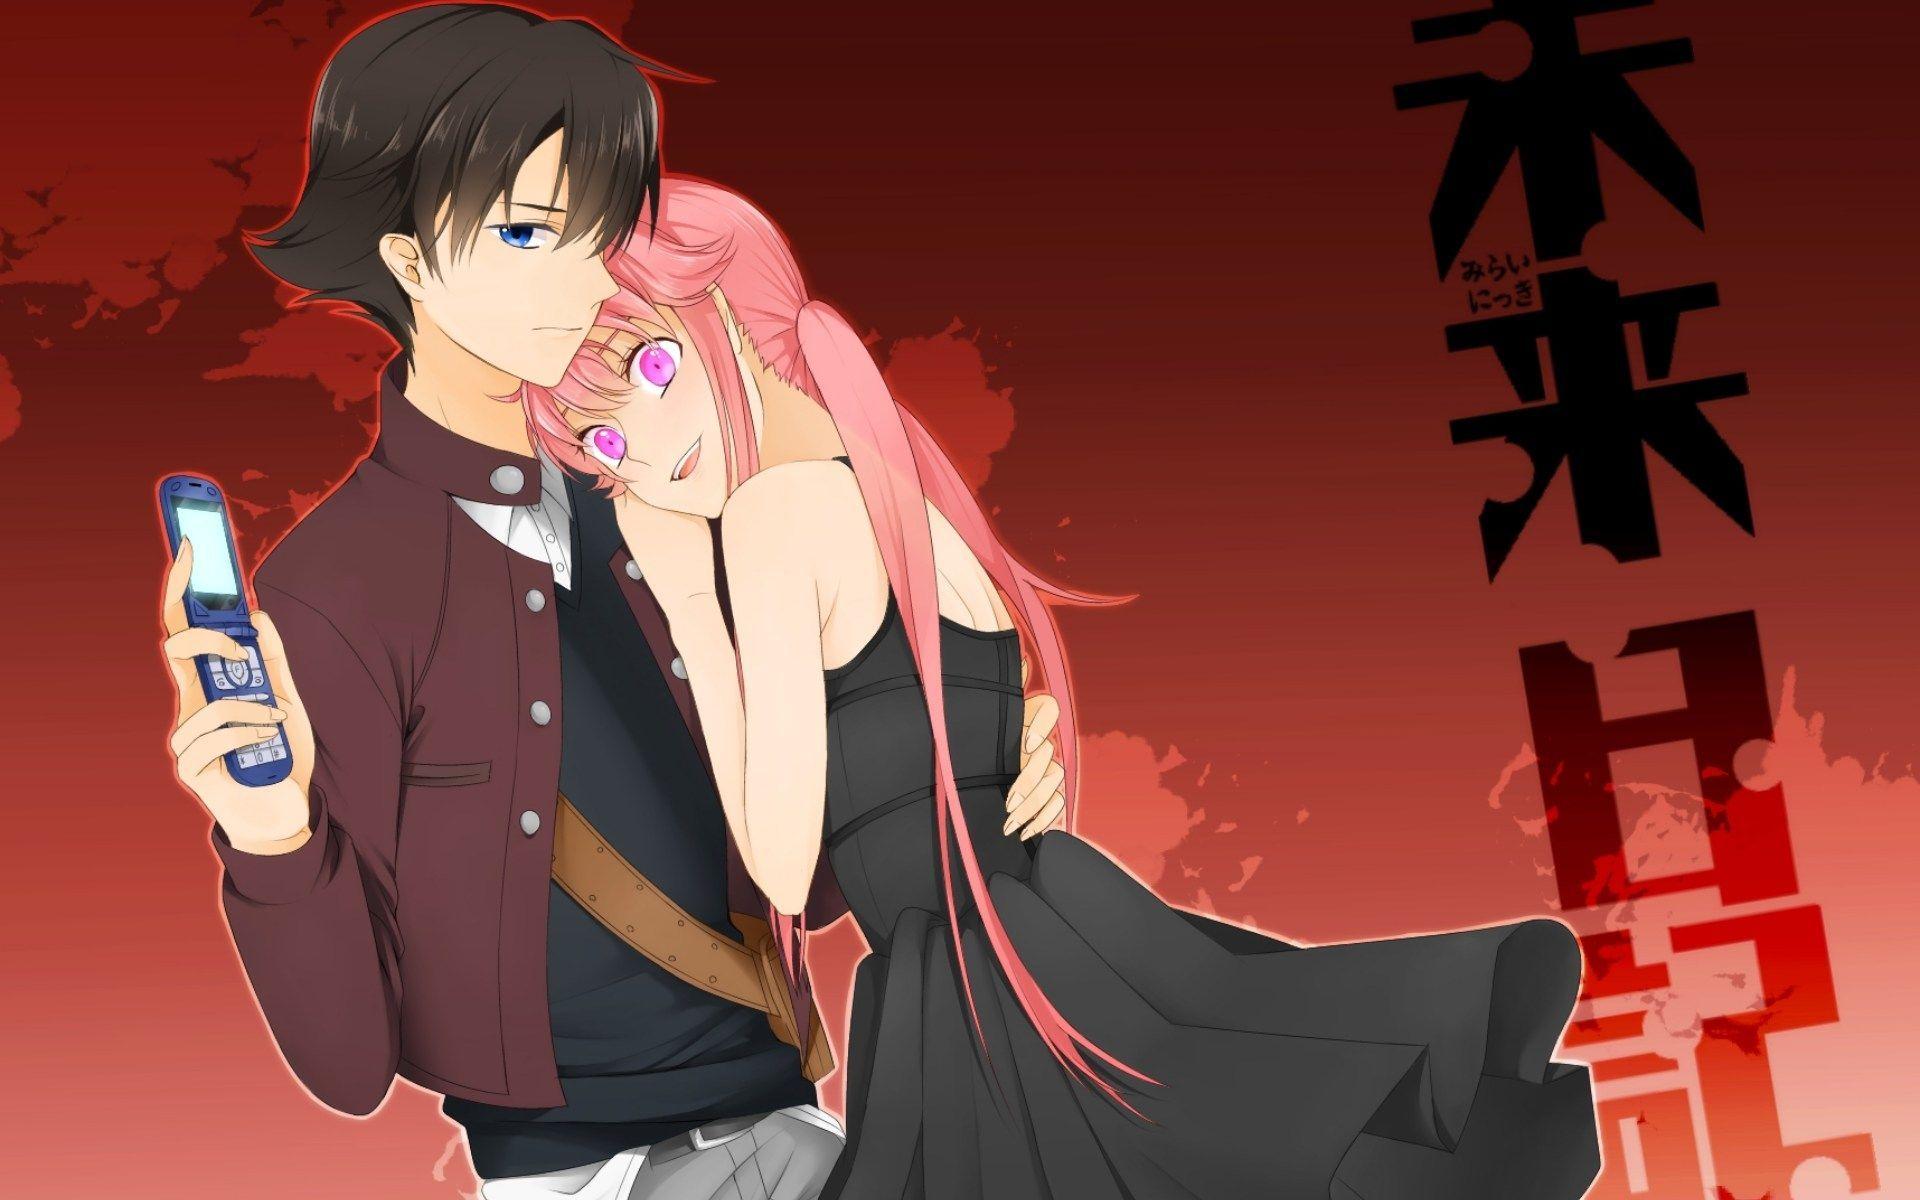 Mirai Nikki is acting fishy! Why is Yuno in the same dress